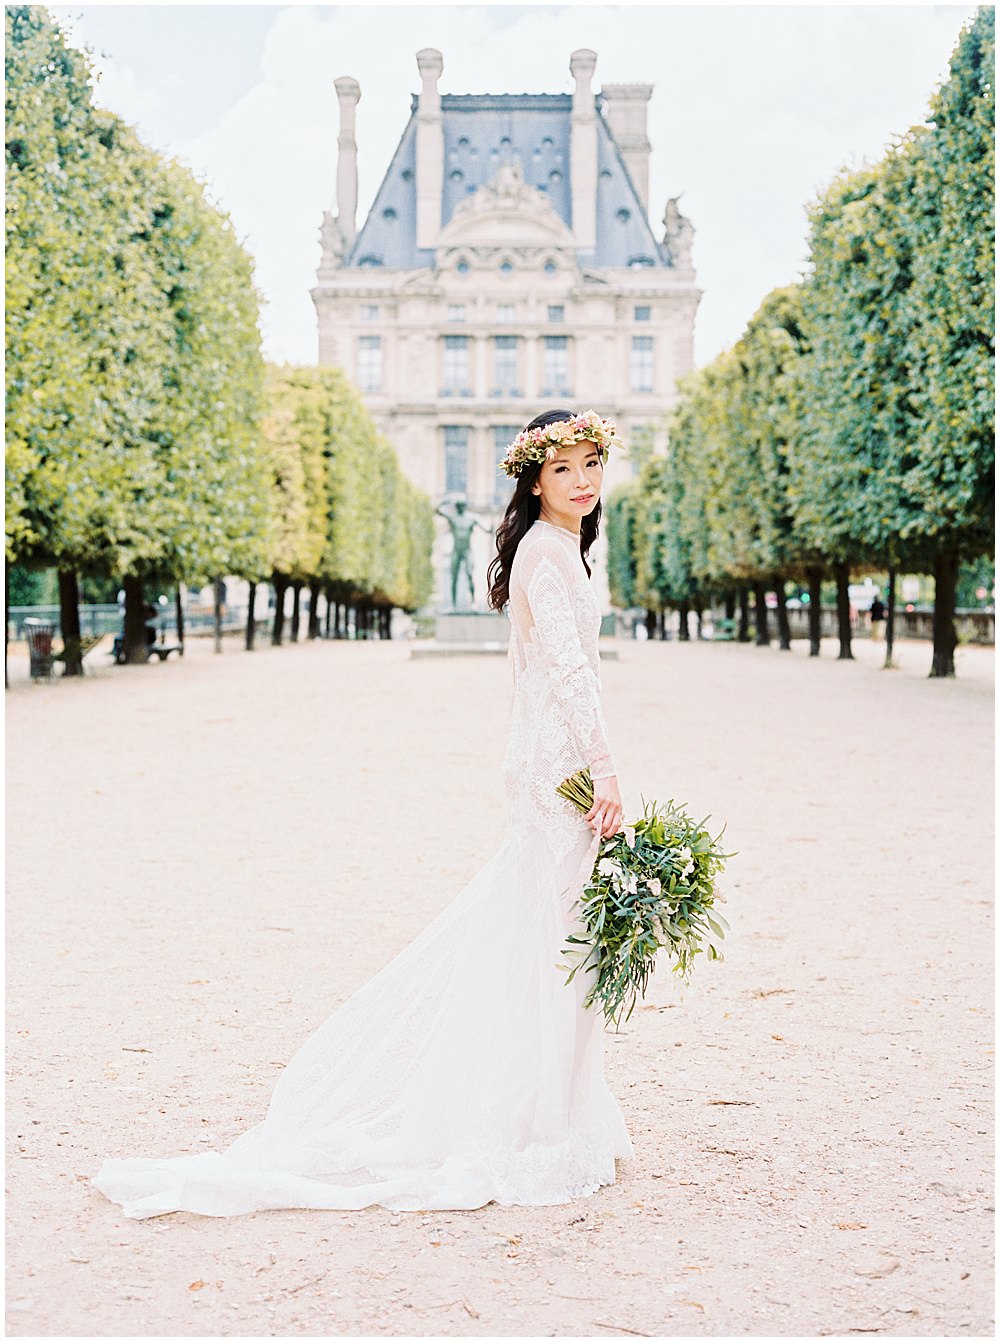 Top 10 Paris Wedding Photography Locations, The Tuileries Gardens, wedding photography paris, 